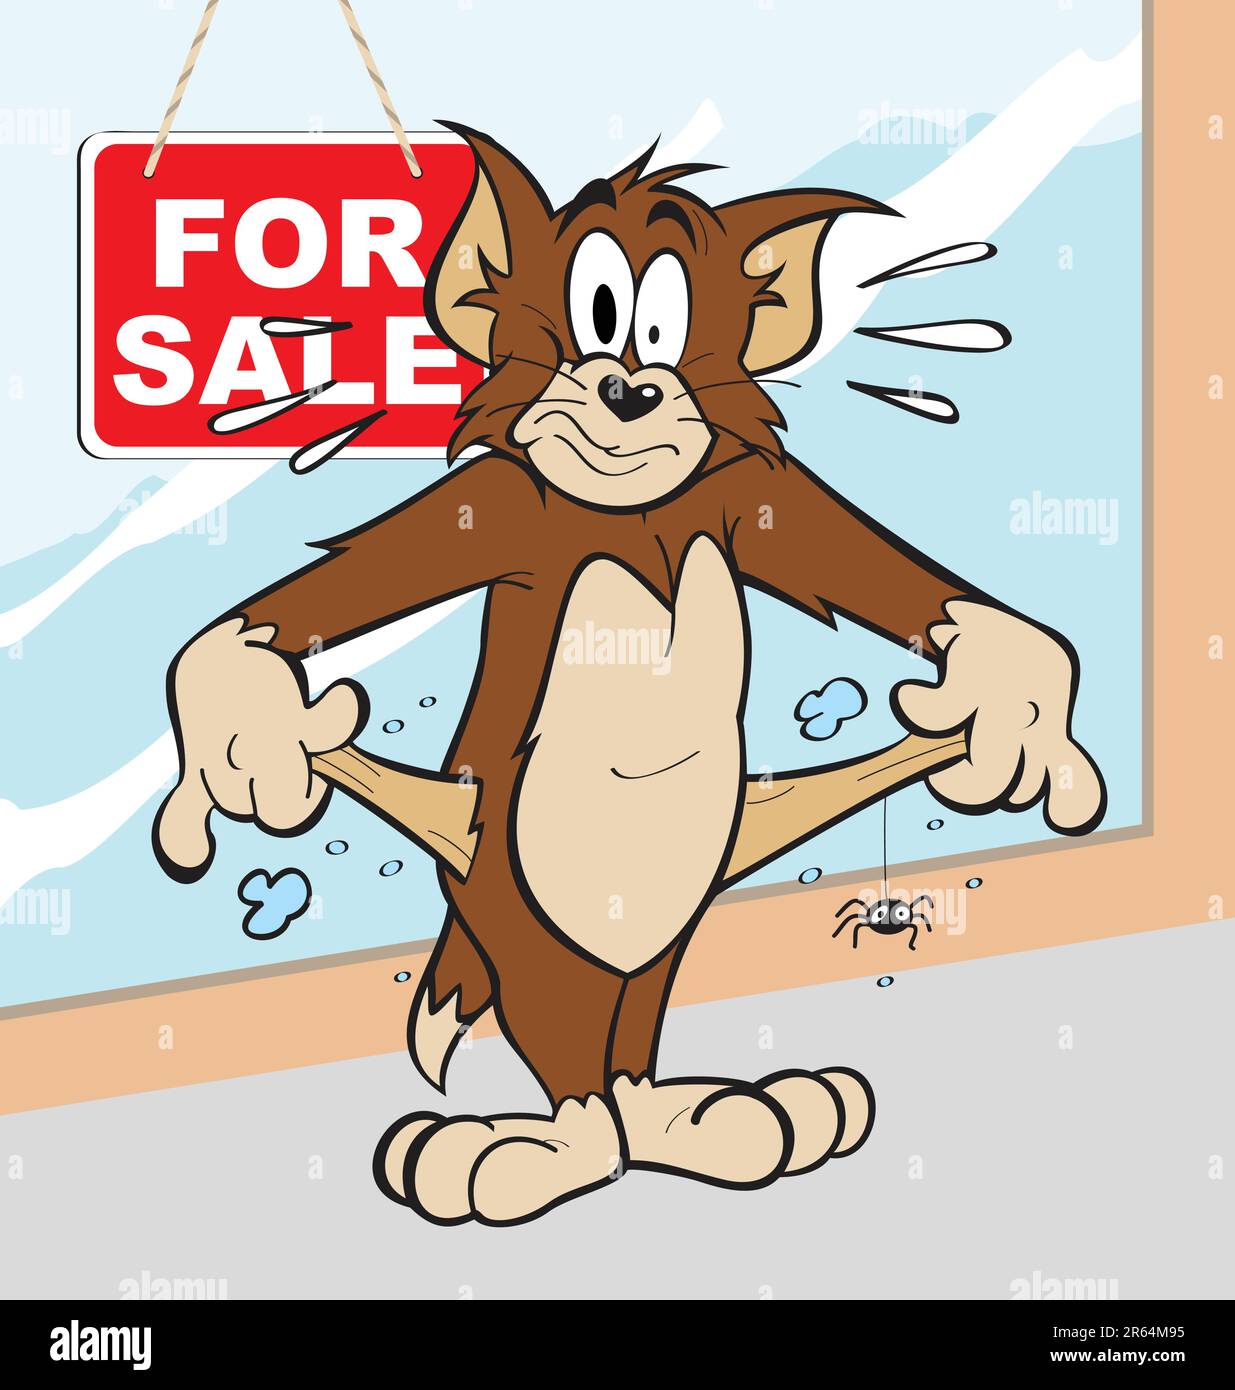 Vector illustration of a broke cat cartoon character showing empty pockets. Art done in Adobe Illustrator, saved as an AI8 EPS file. Can be scaled ... Stock Vector